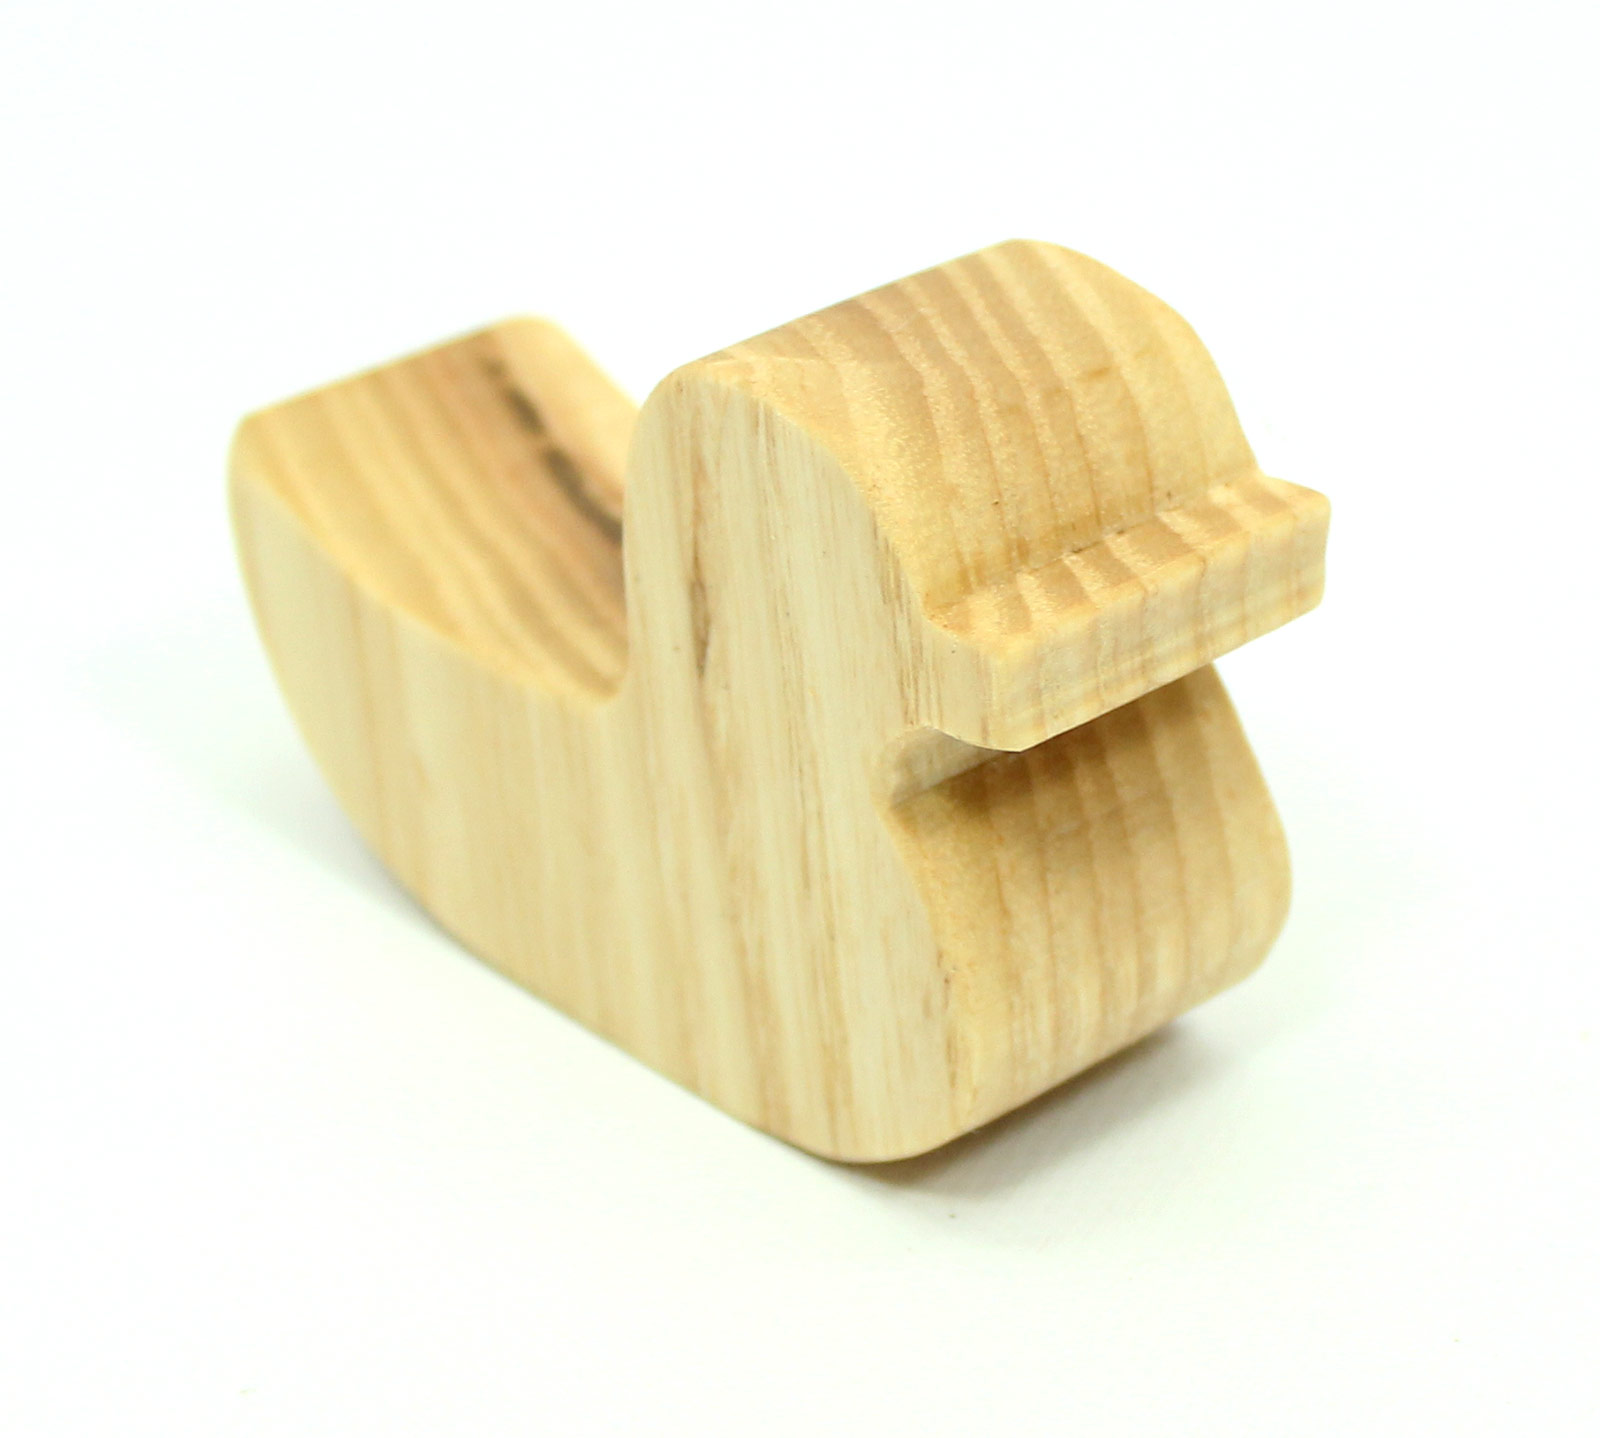 Wooden Rubber Duck Toy